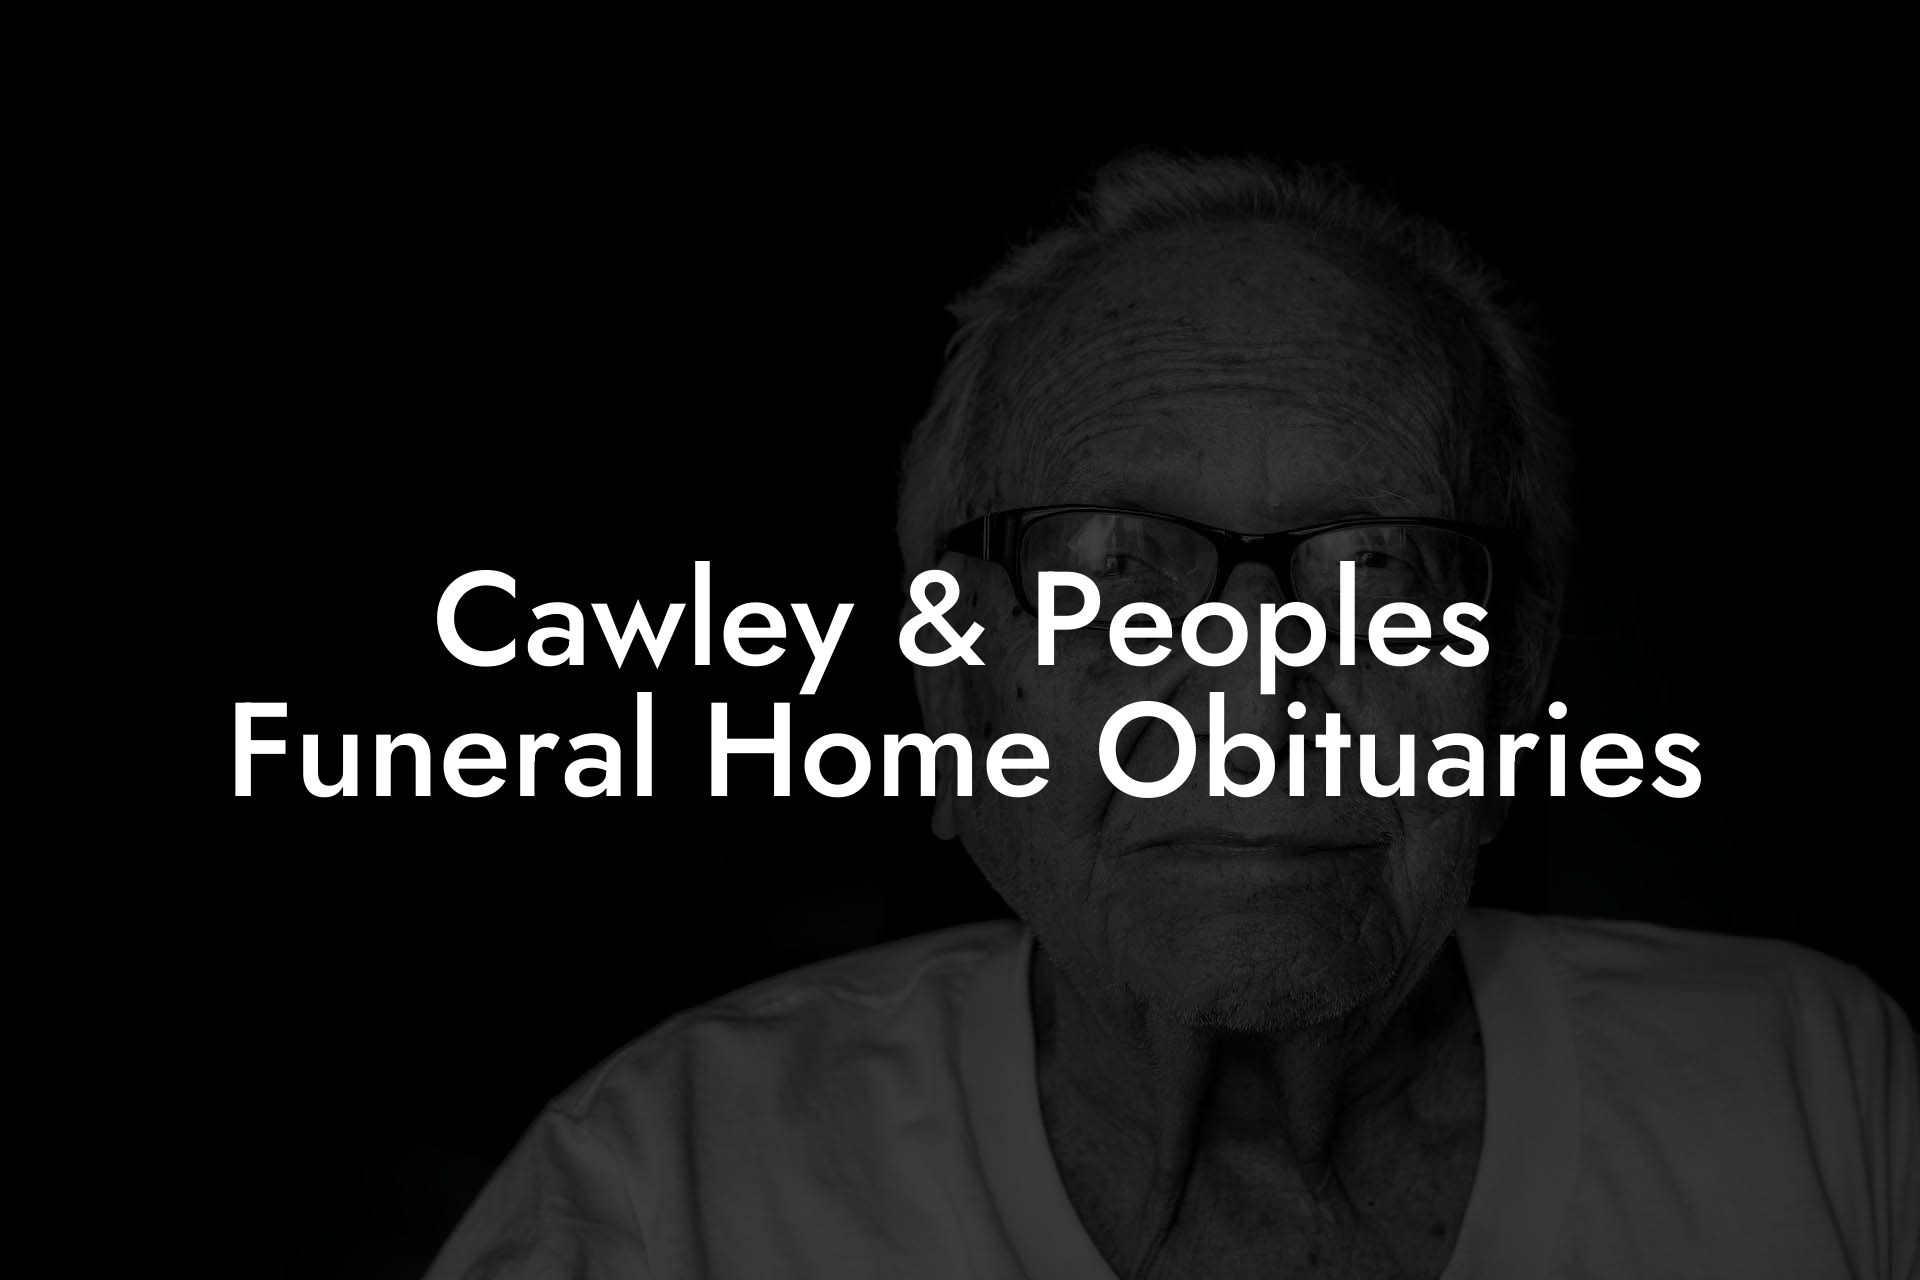 Cawley & Peoples Funeral Home Obituaries